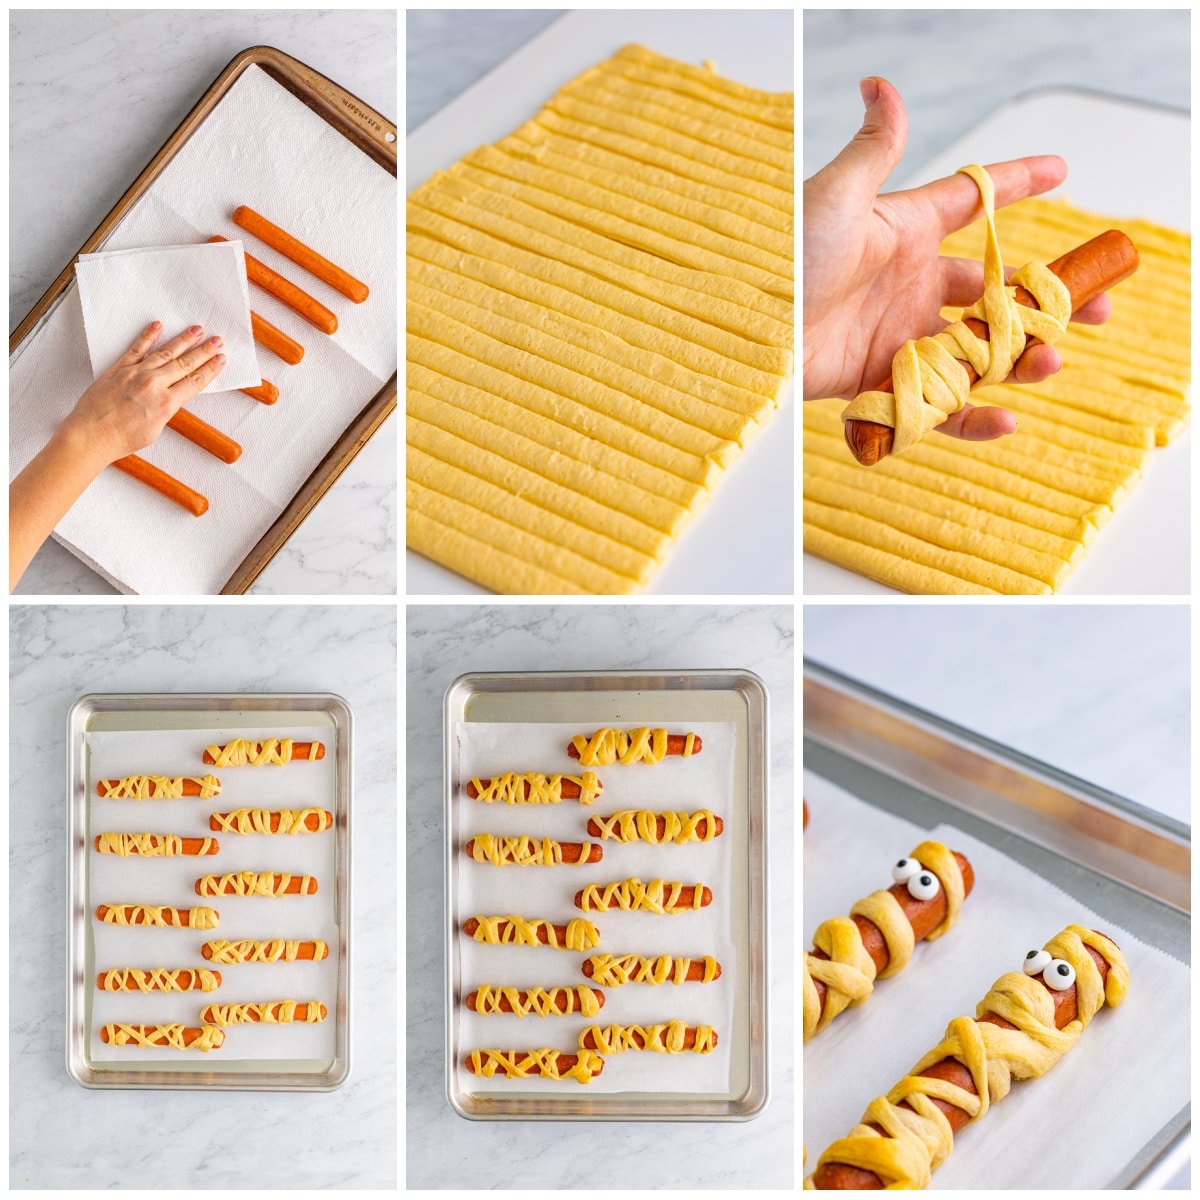 Step by step photos on how to make Mummy Dogs.